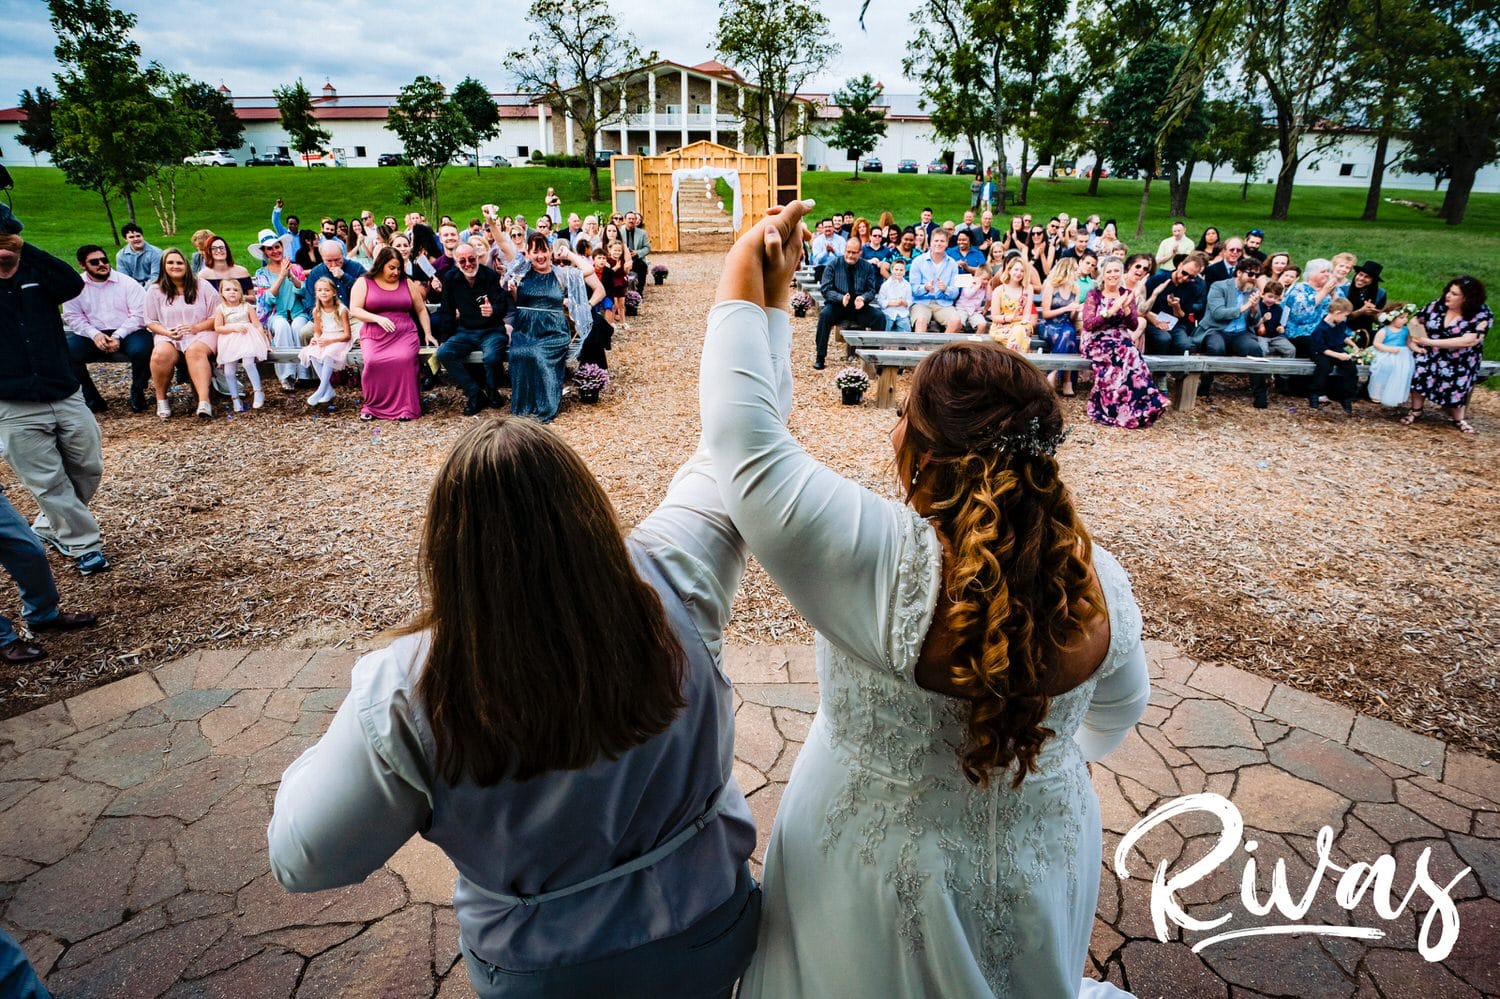 A candid, colorful picture taken from behind two brides raising their hands in celebration at the end of their wedding ceremony as their friends and family clap and celebrate. 